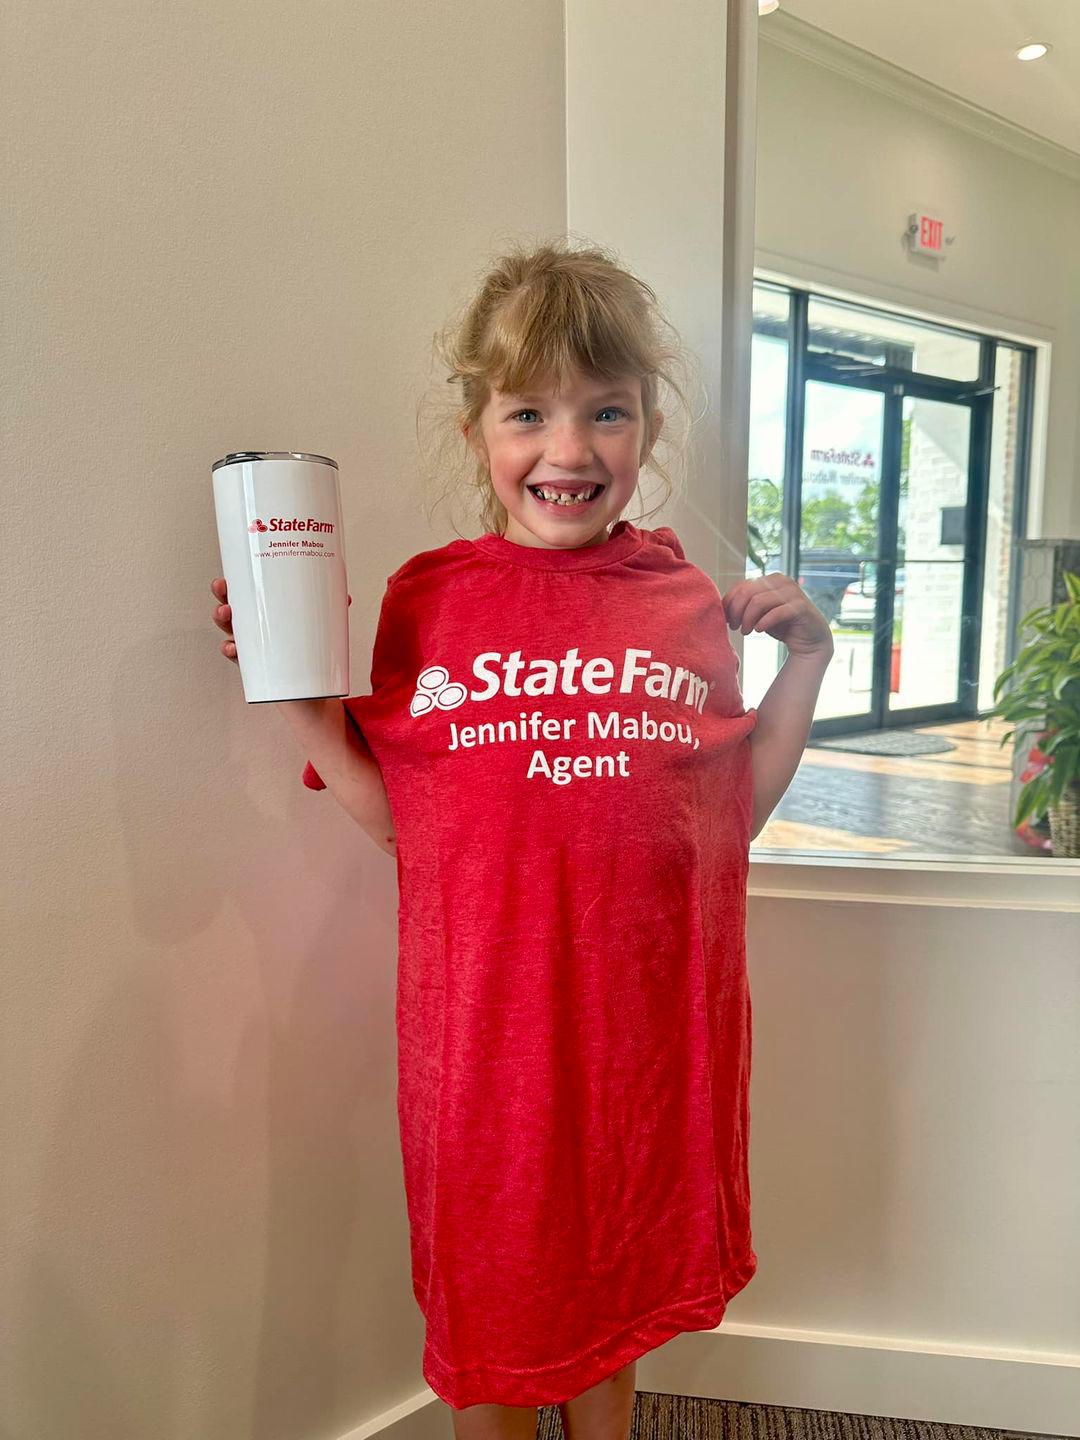 When you show up to our office on your birthday, you get presents!!! Happy birthday sweet Evelyn!! W Jennifer Mabou - State Farm Insurance Agent Sulphur (337)527-0027